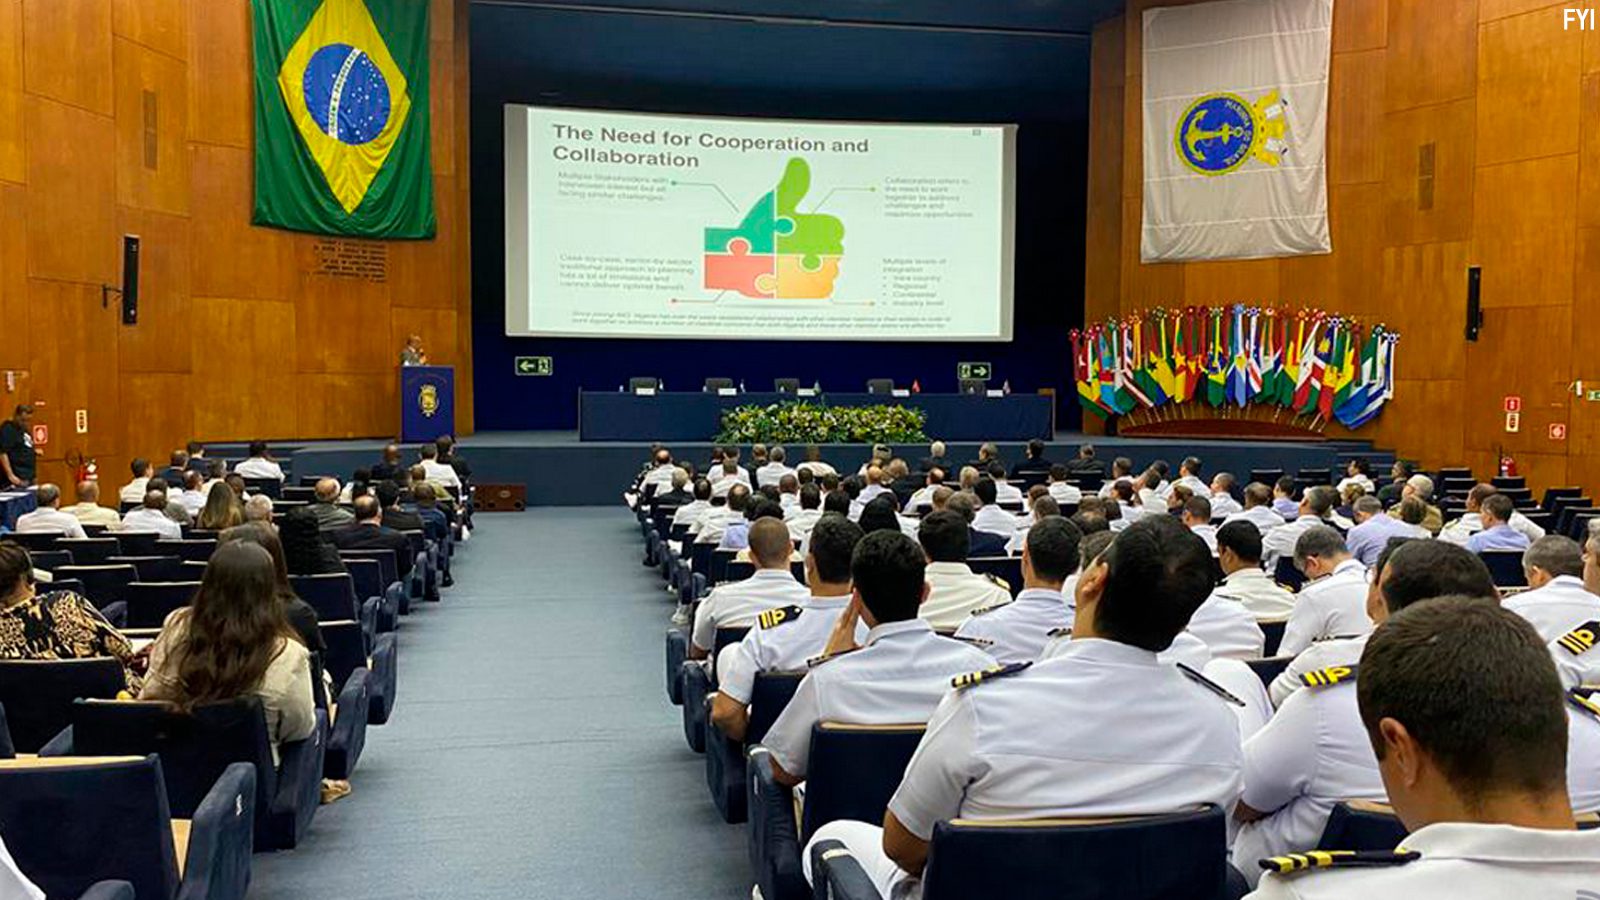 With the theme "Strengthening Maritime Cooperation and Security in the South Atlantic", the event was open to the public and broadcast live